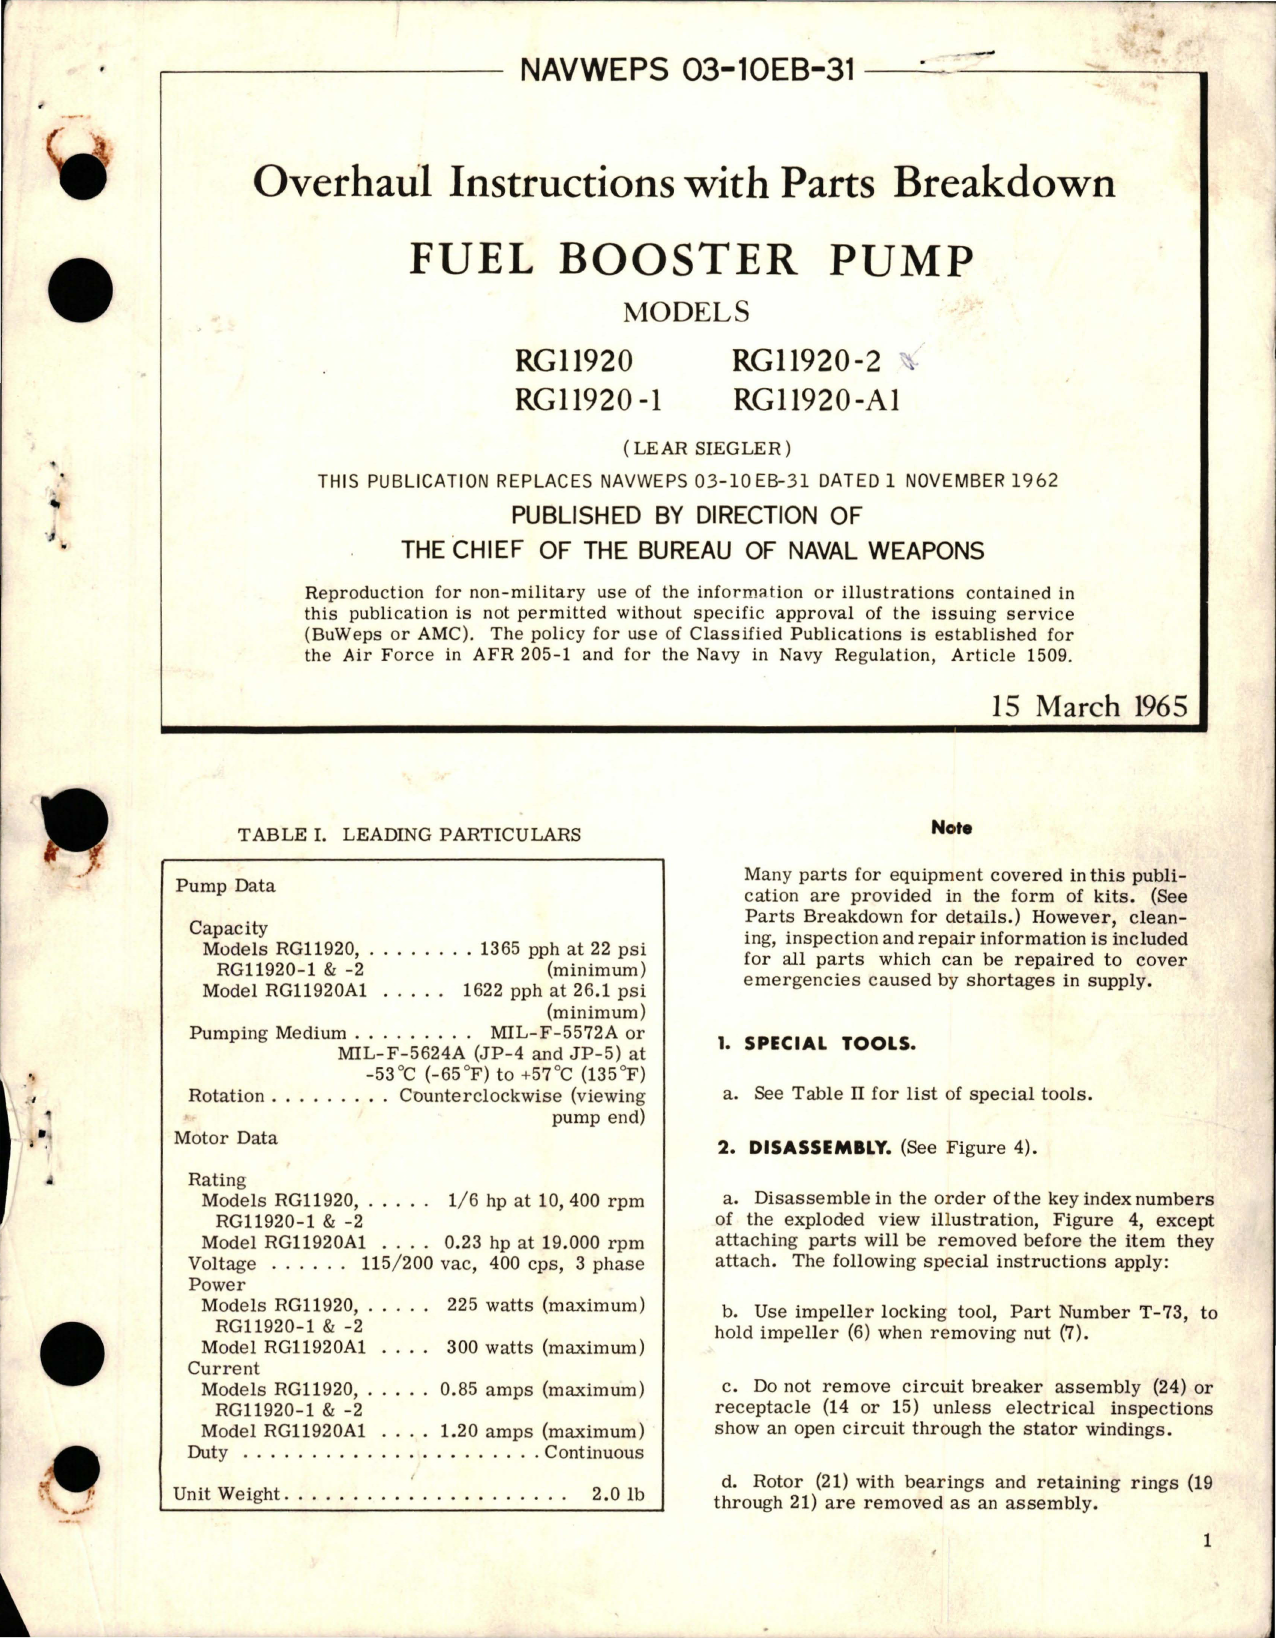 Sample page 1 from AirCorps Library document: Overhaul Instructions with Parts Breakdown for Fuel Booster Pump - Models RG11920, RG11920-1, RG11920-2, and RG11920-A1